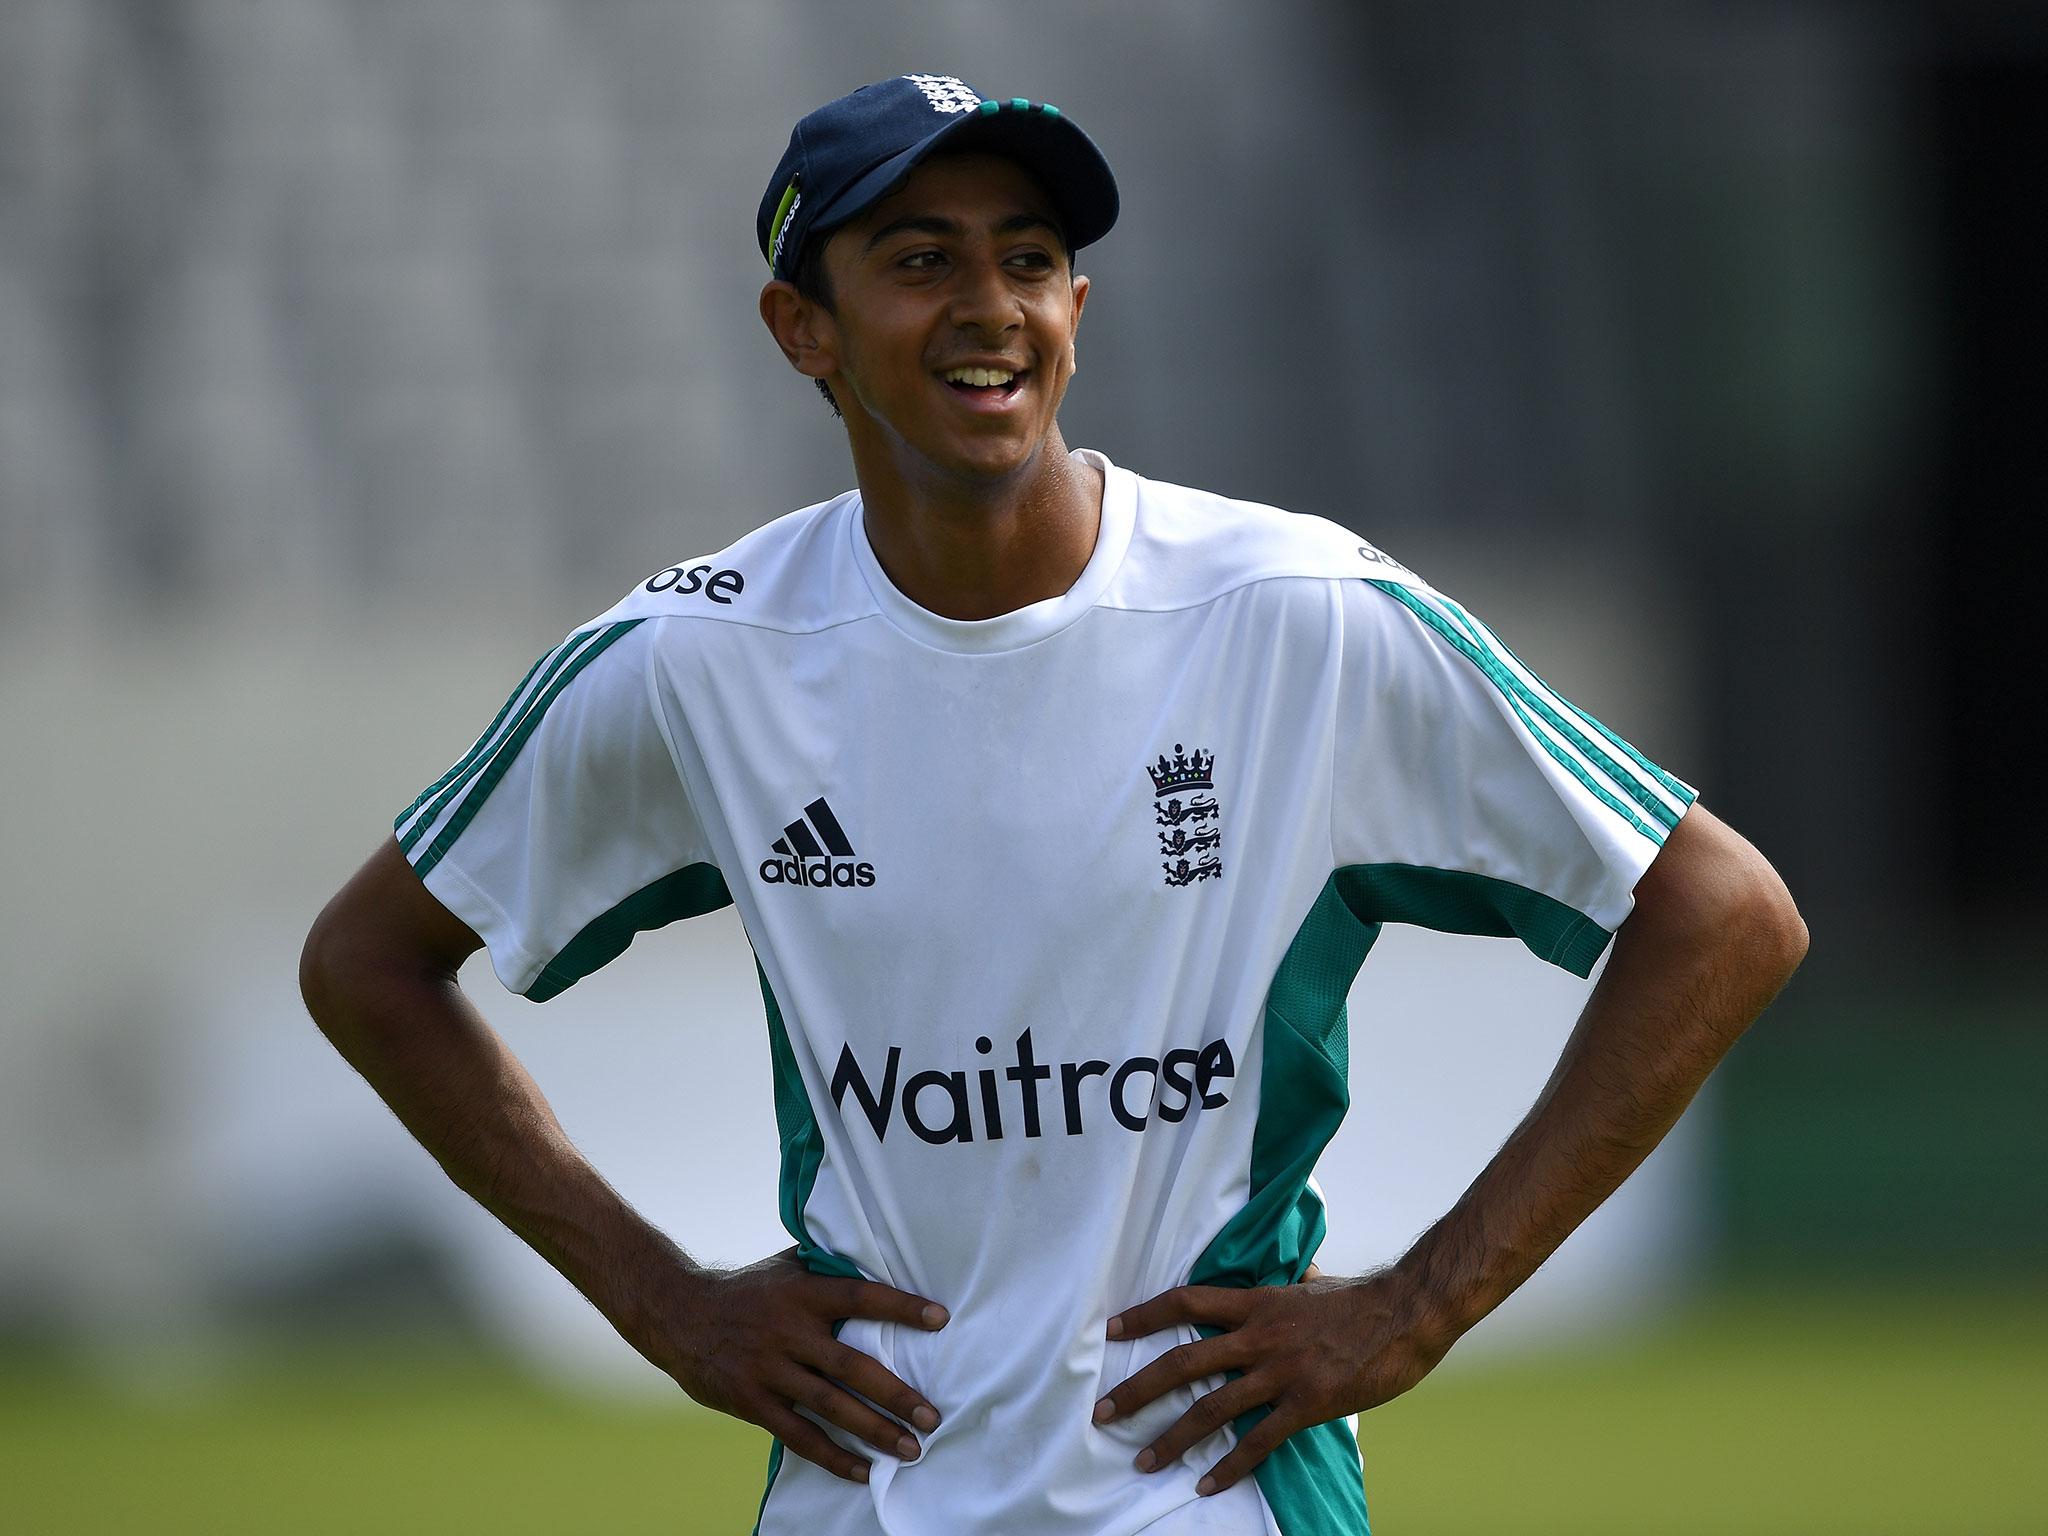 Haseeb Hameed has the potential to be England's prized wicket for the next decade